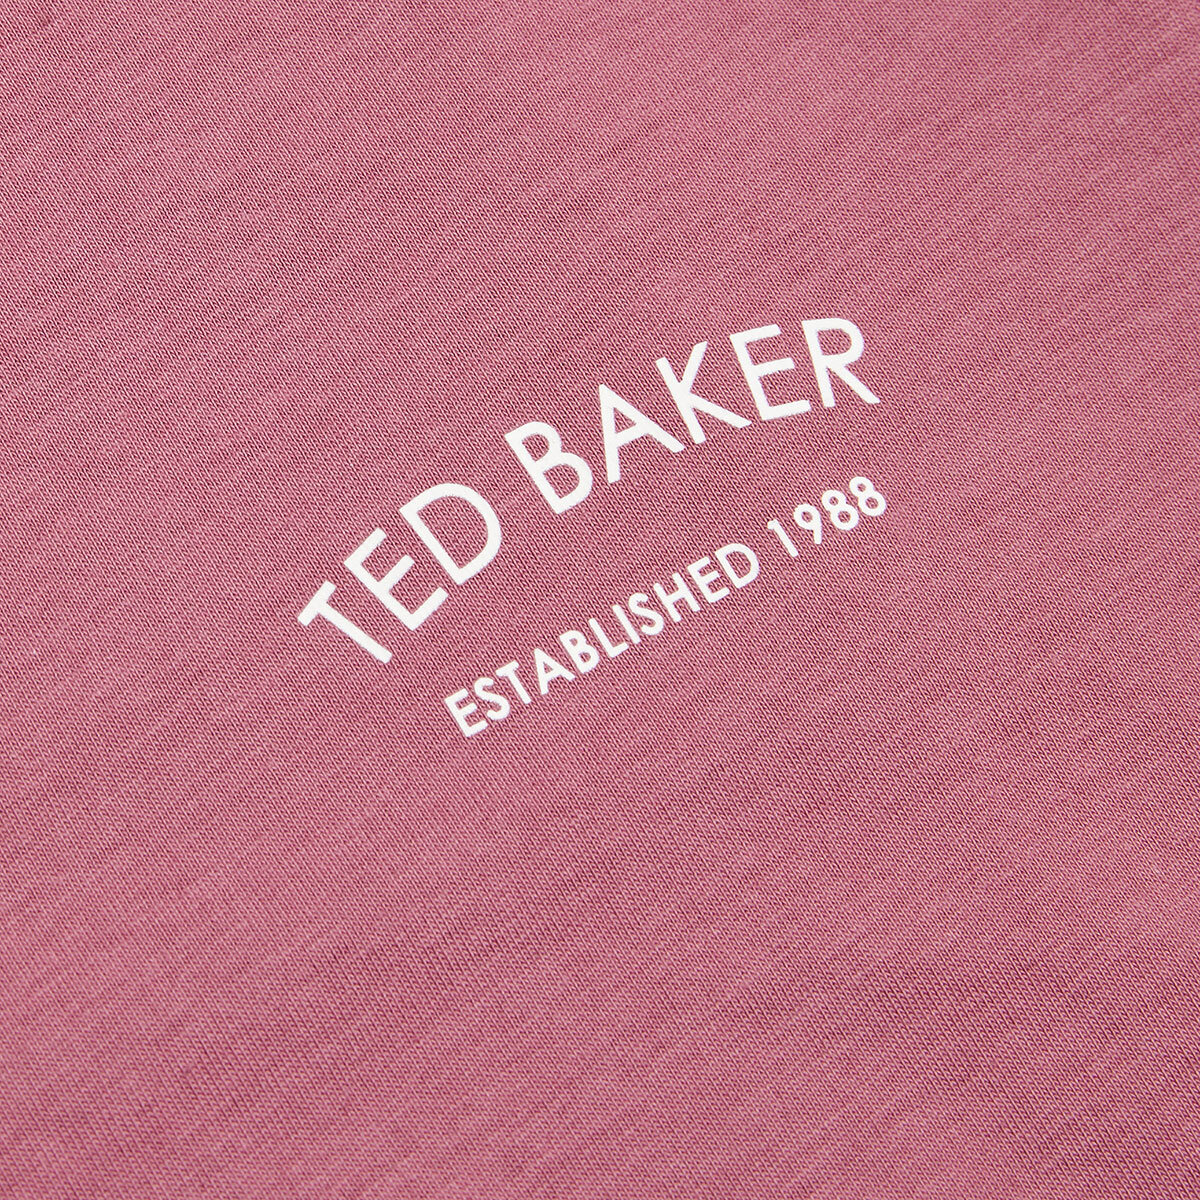 Ted Baker T-Shirt in Pink